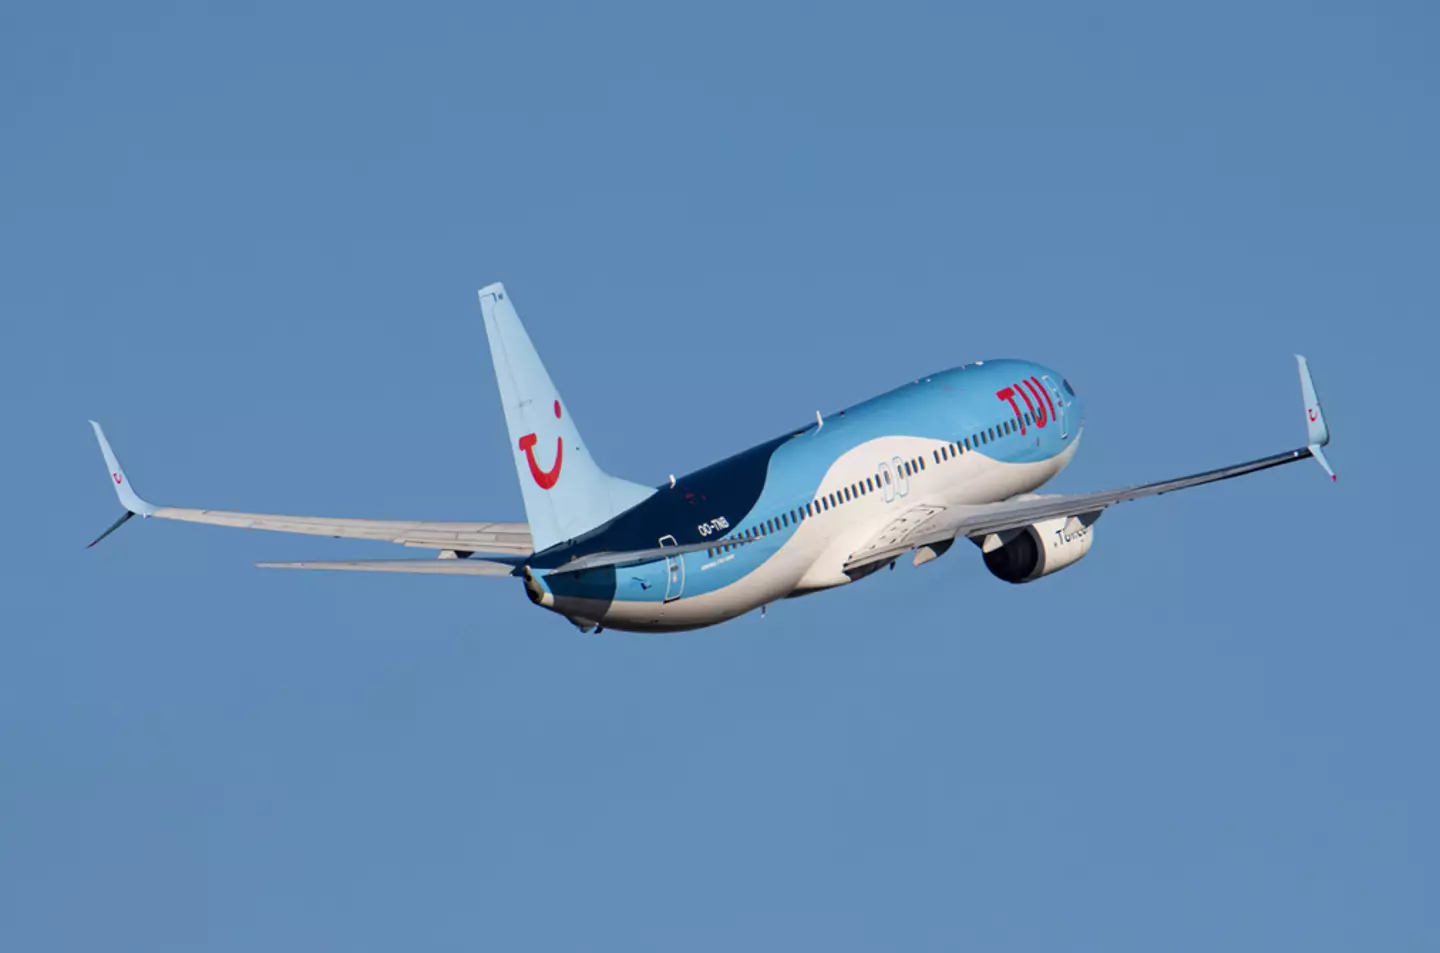 Tui allegedly stood by its original decision even when the couple had returned home.